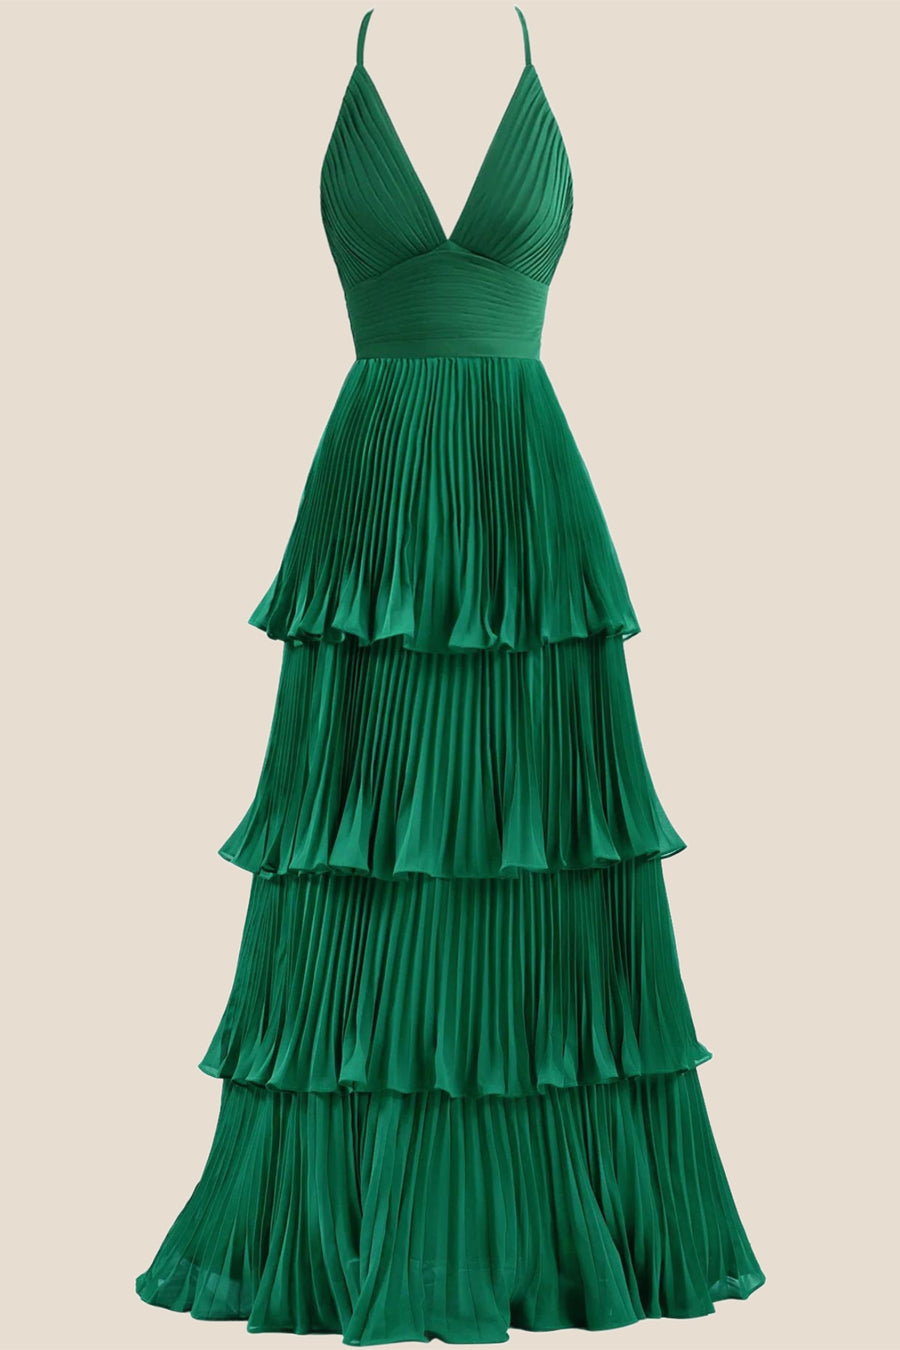 Emerald Green Pleated Empire Tiered A-line Party Dress